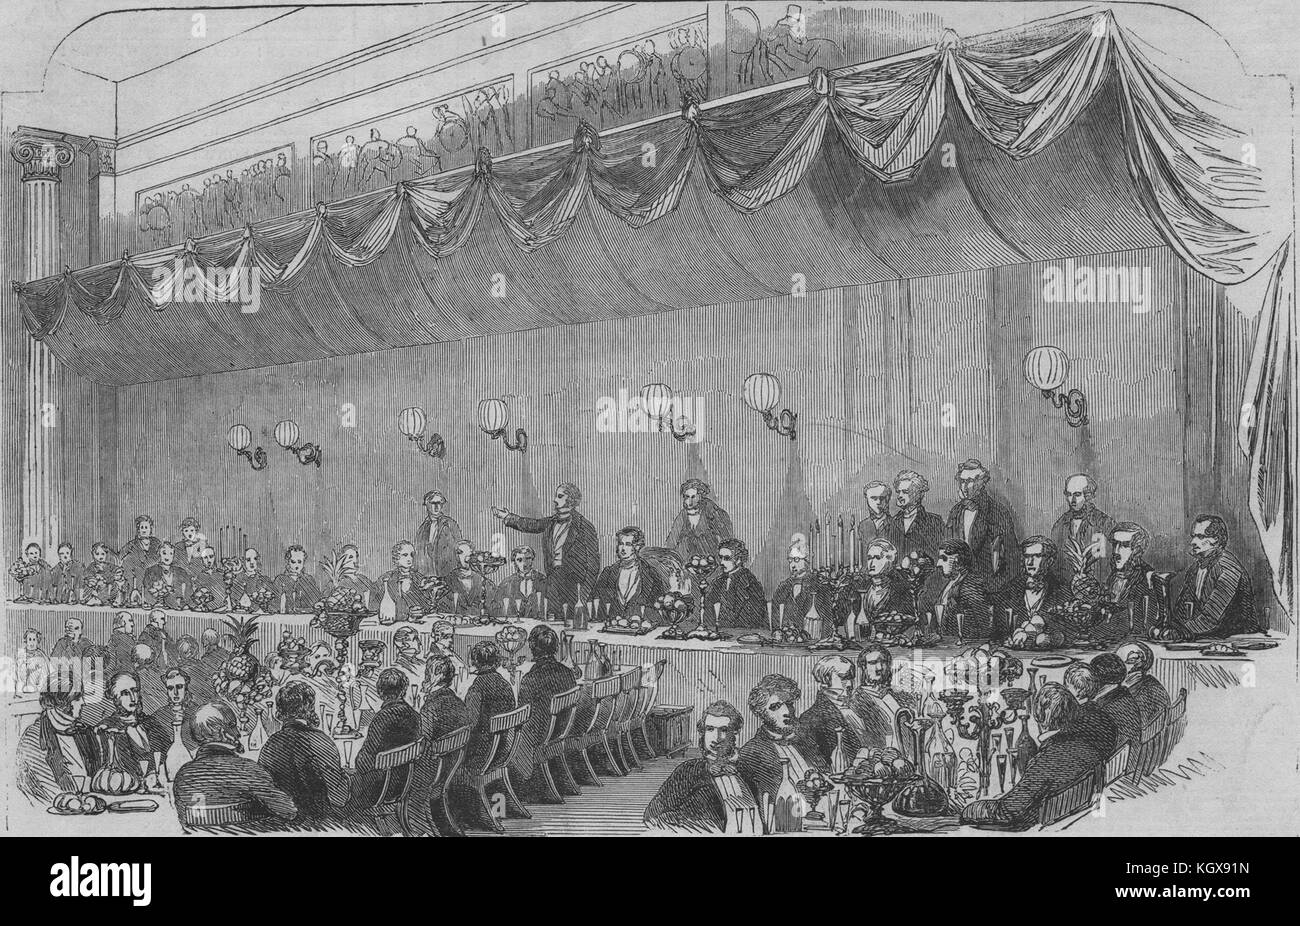 Banquet to Mr. Ingersoll, the American minister, Manchester town hall 1853. The Illustrated London News Stock Photo